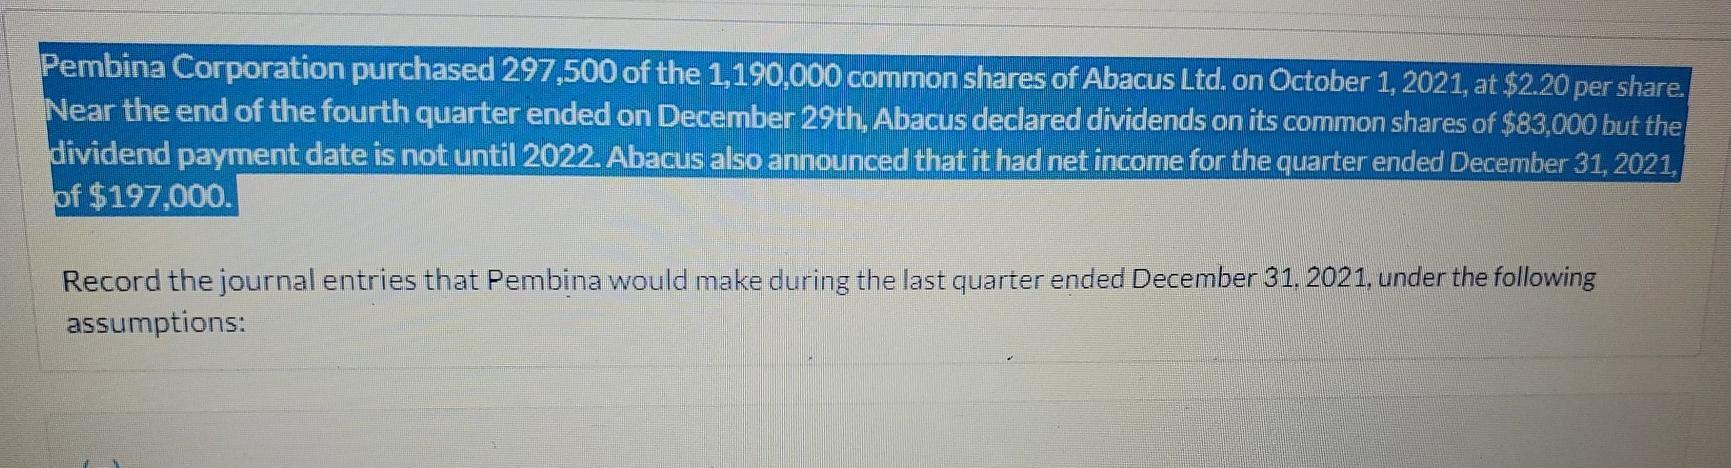 Pembina Corporation purchased 297,500 of the 1,190,000 common shares of Abacus Ltd. on October 1, 2021, at $2.20 per share.N